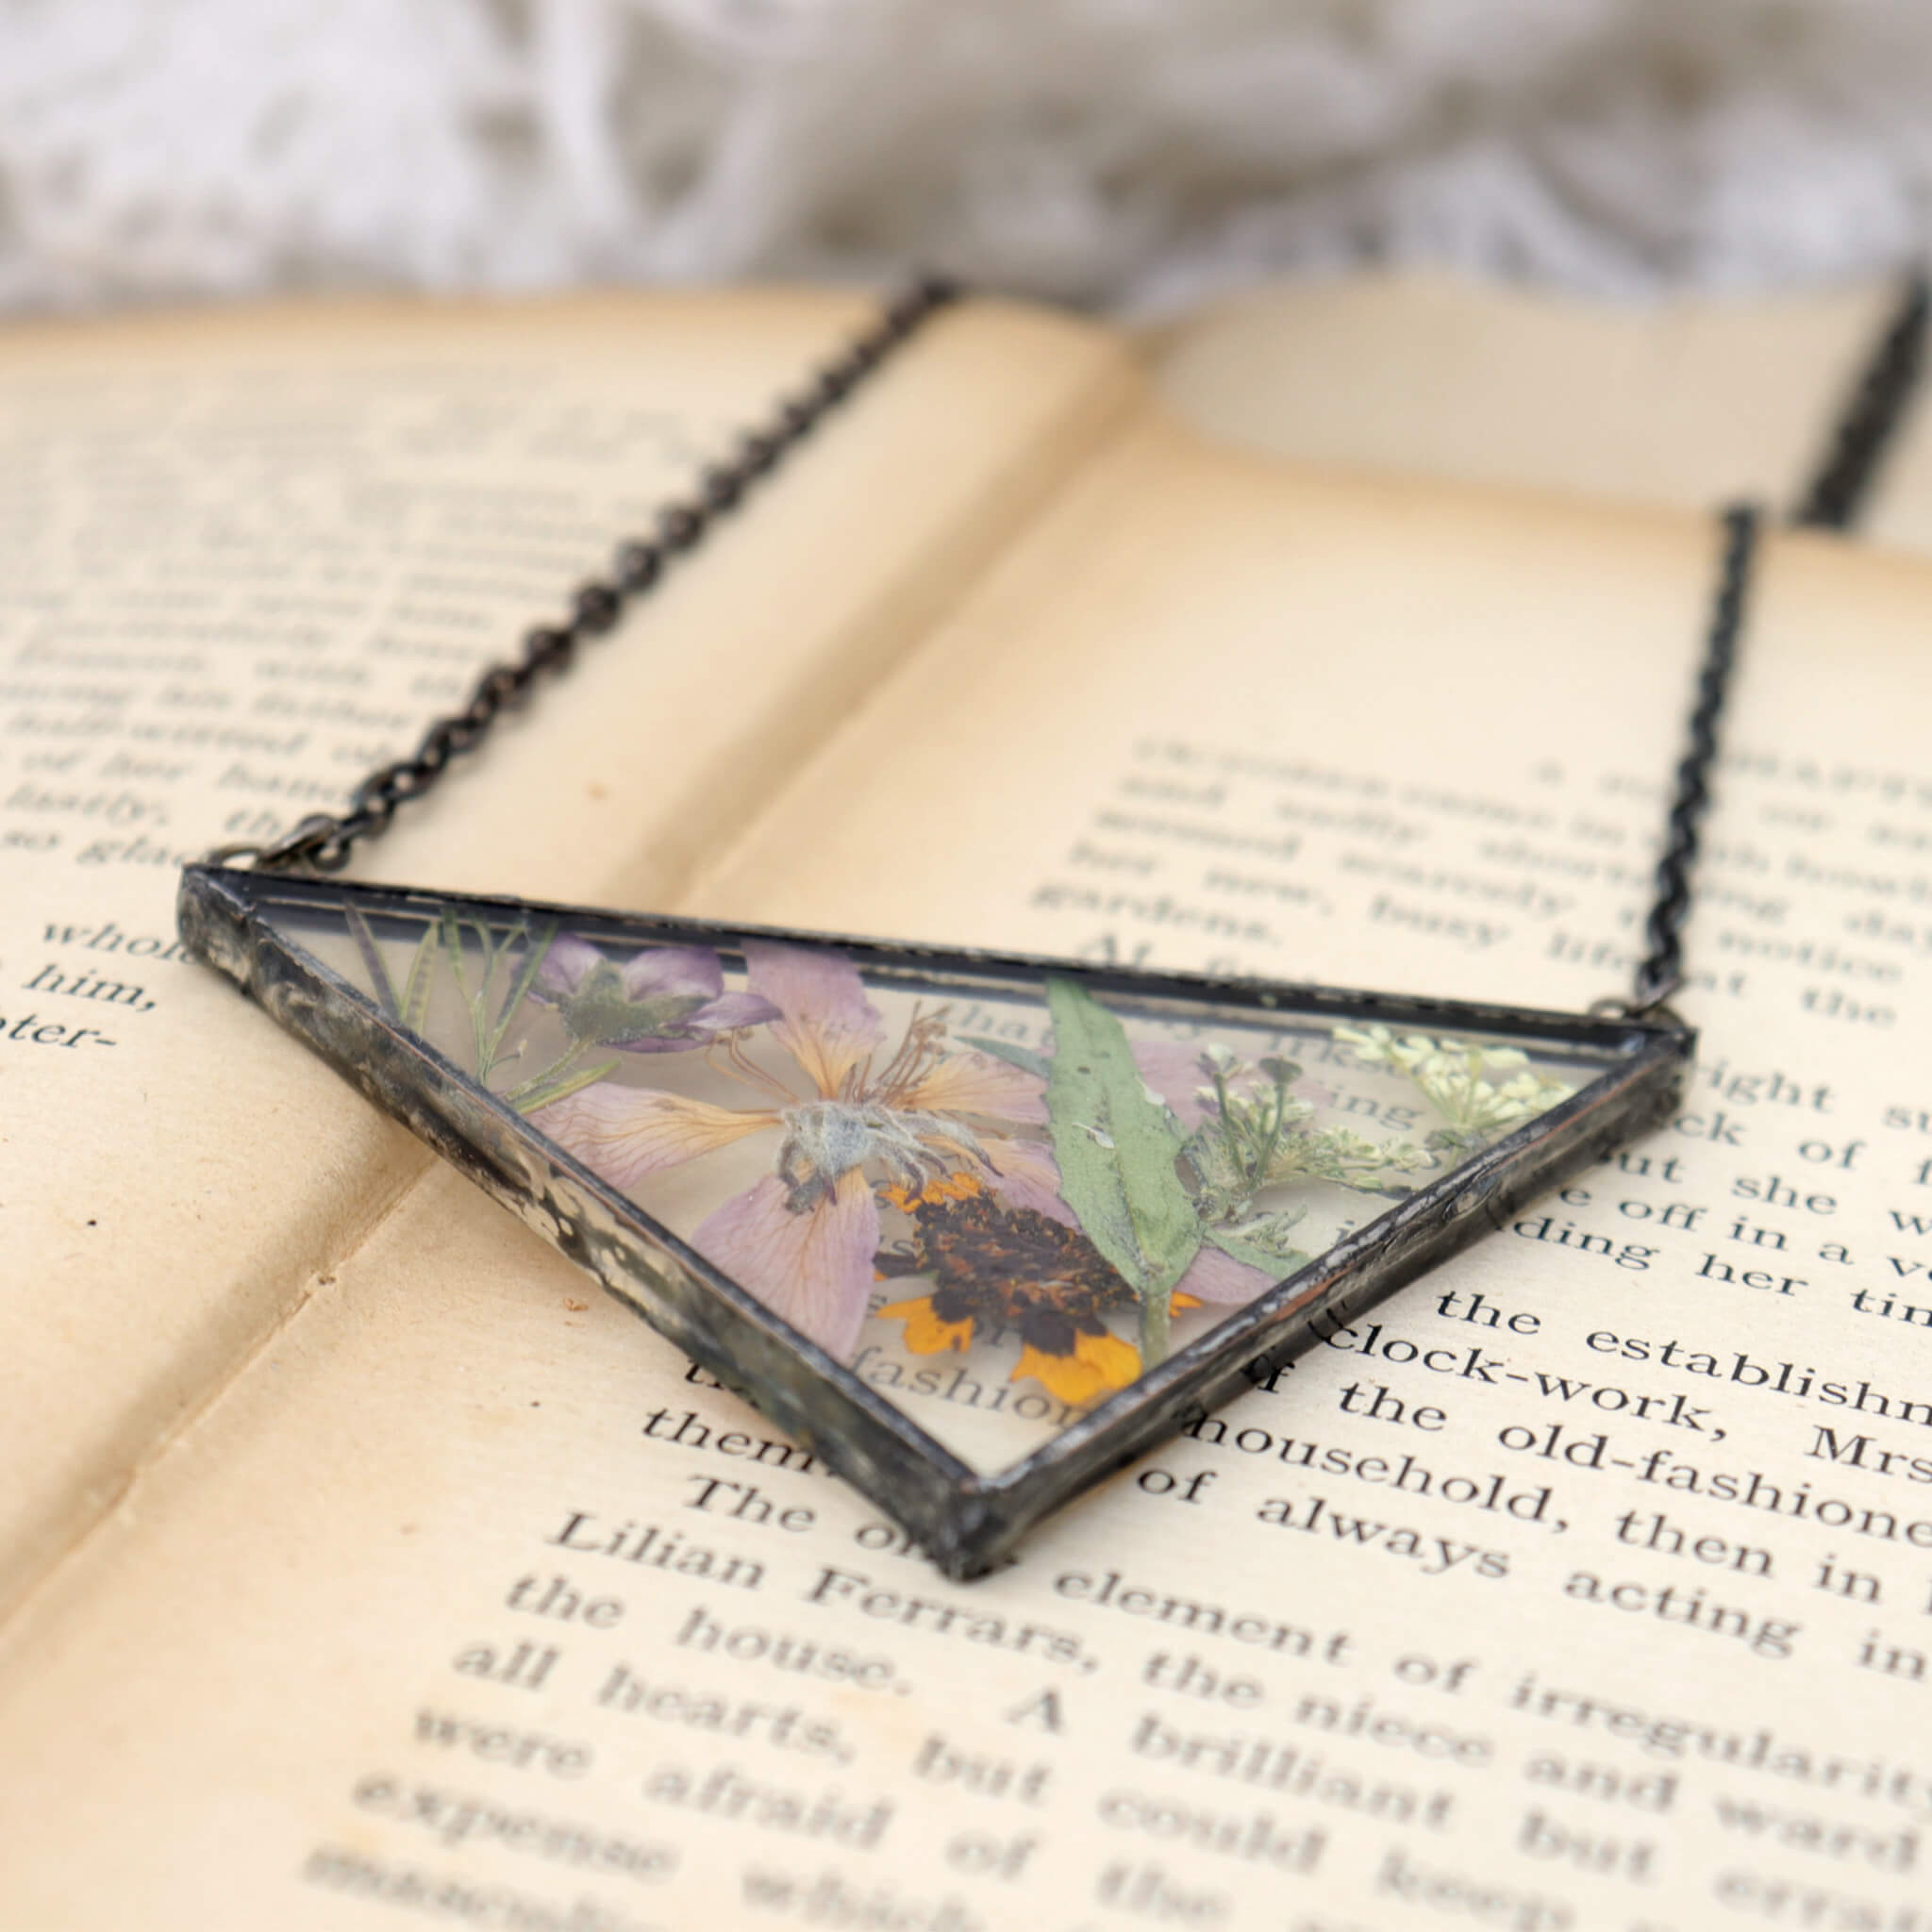 Necklace of a mix of pressed flowers in triangular soldered glass lying on an old book